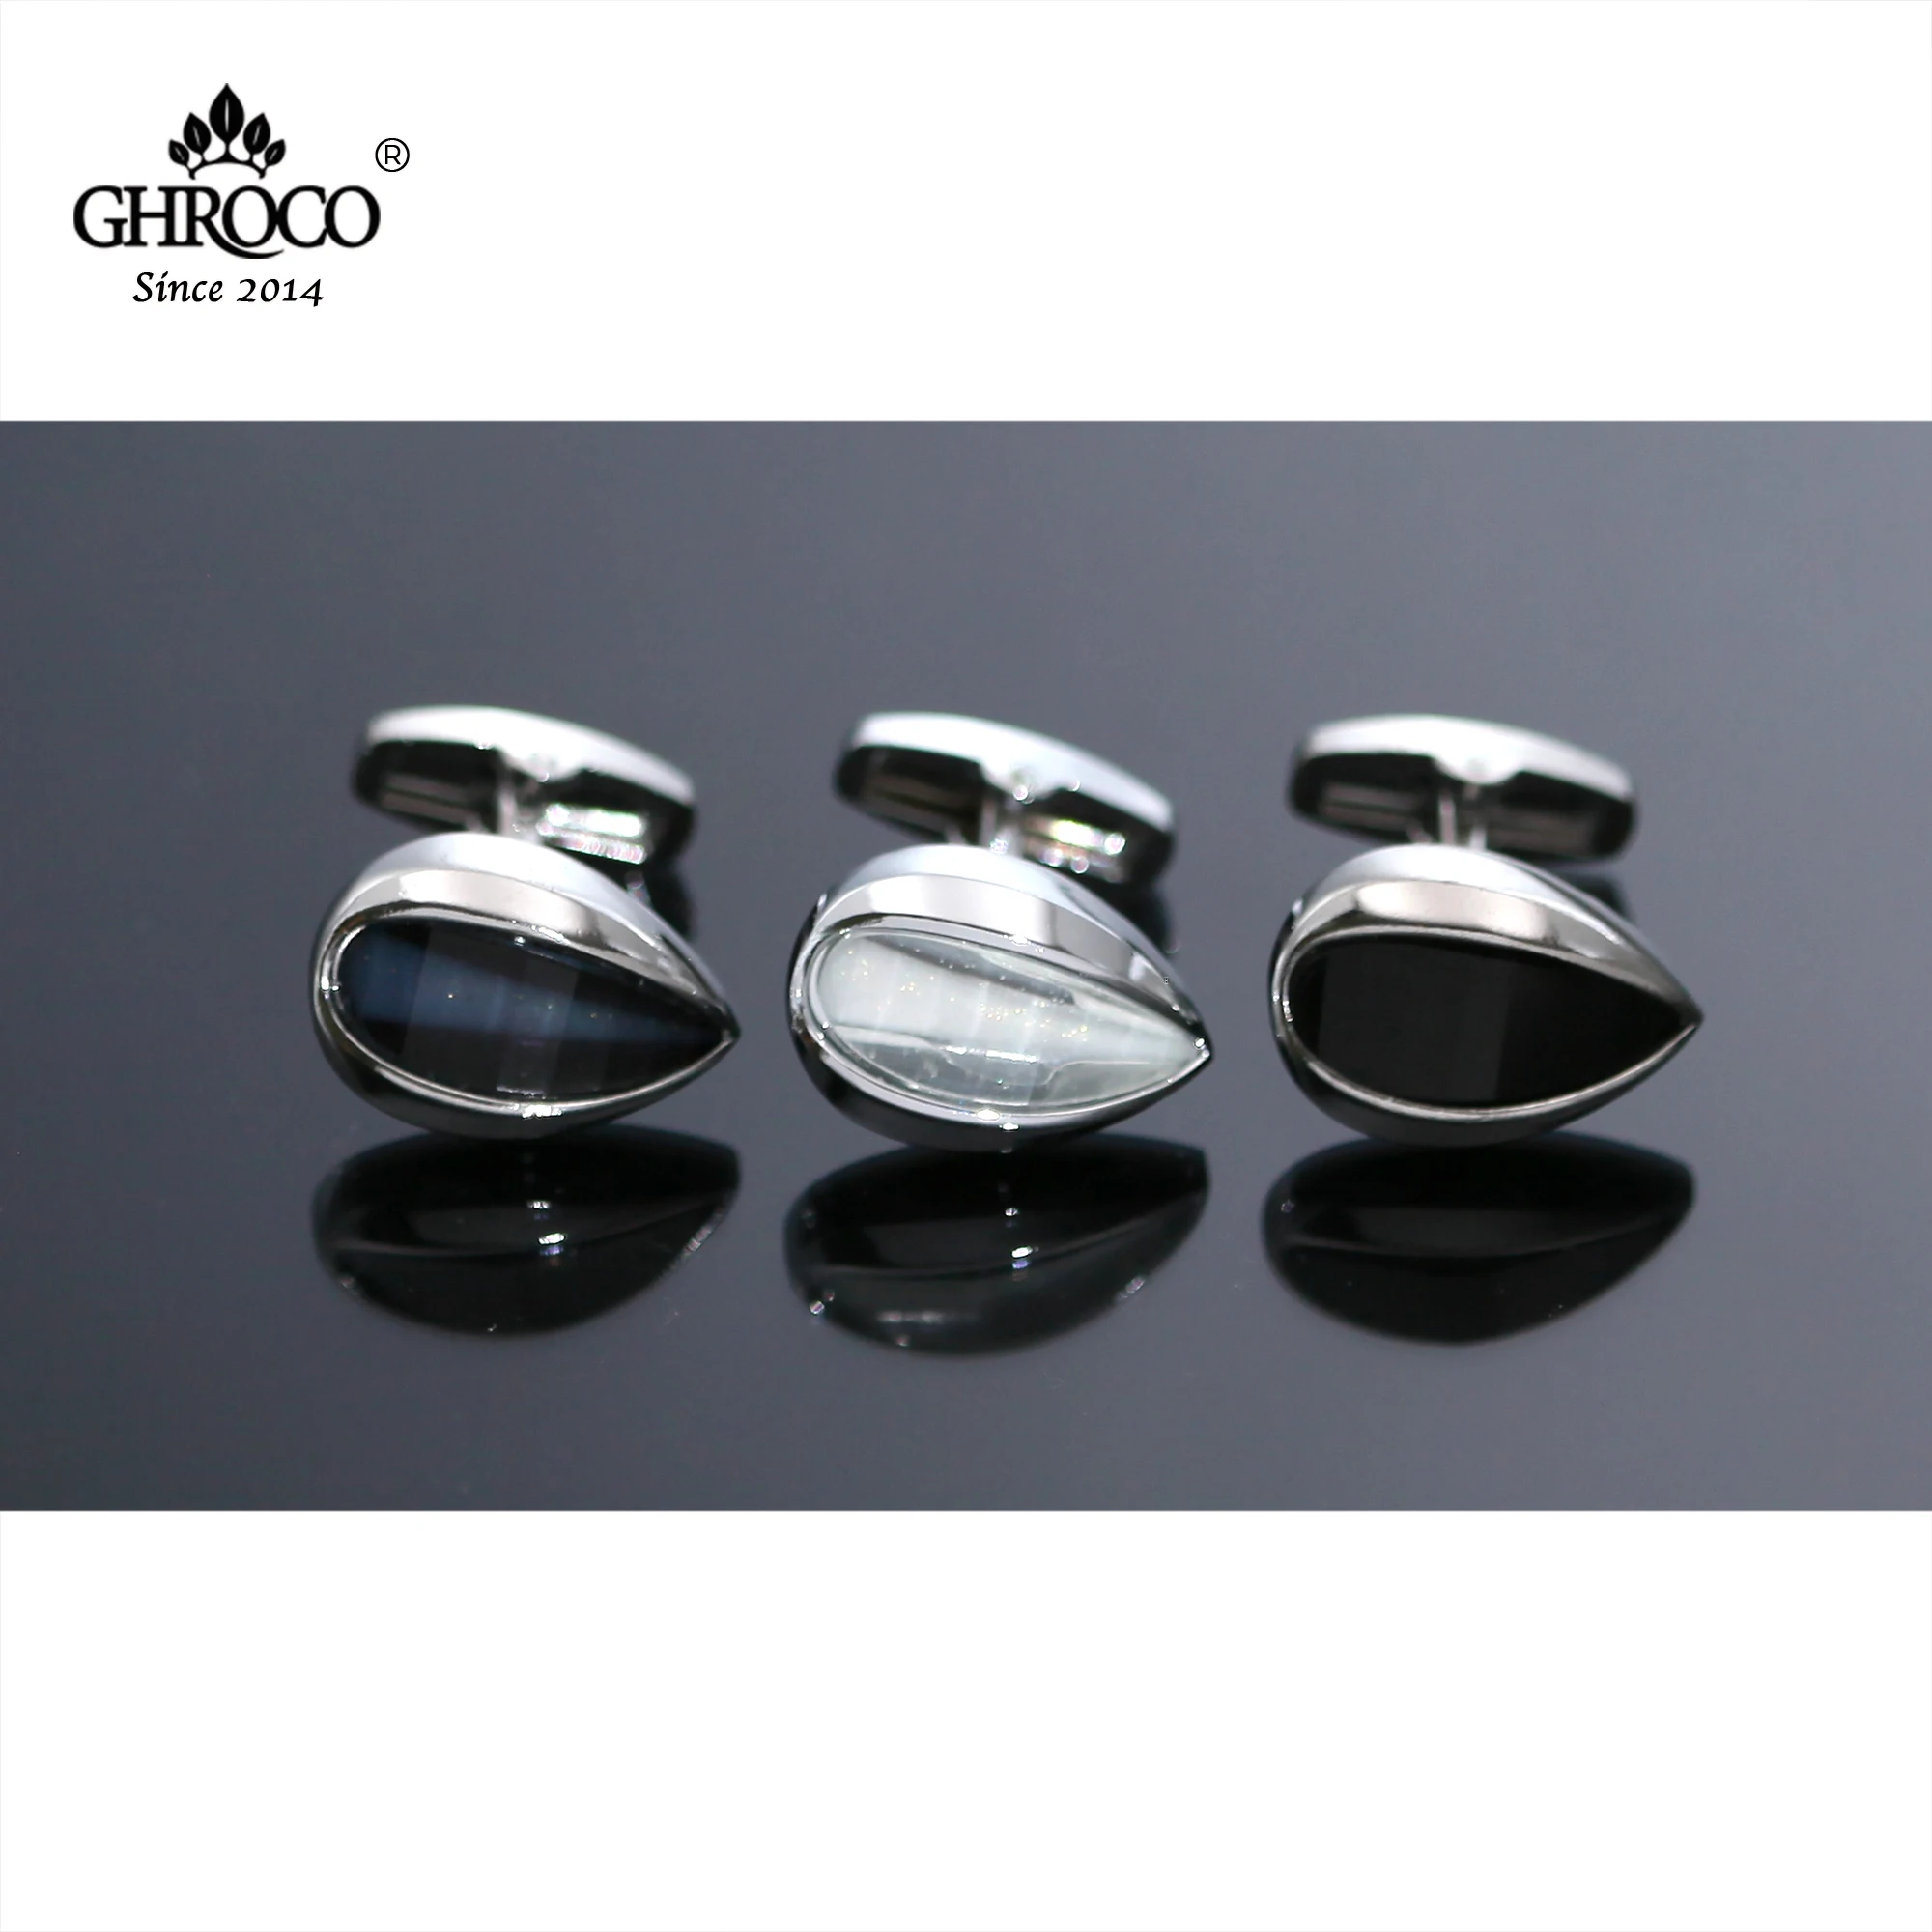 

GHROCO High-Quality Exquisite Droplet Shaped Inlaid with Drop Rubber Shirt Cufflink Fashion Luxury Gift for Business Men Wedding